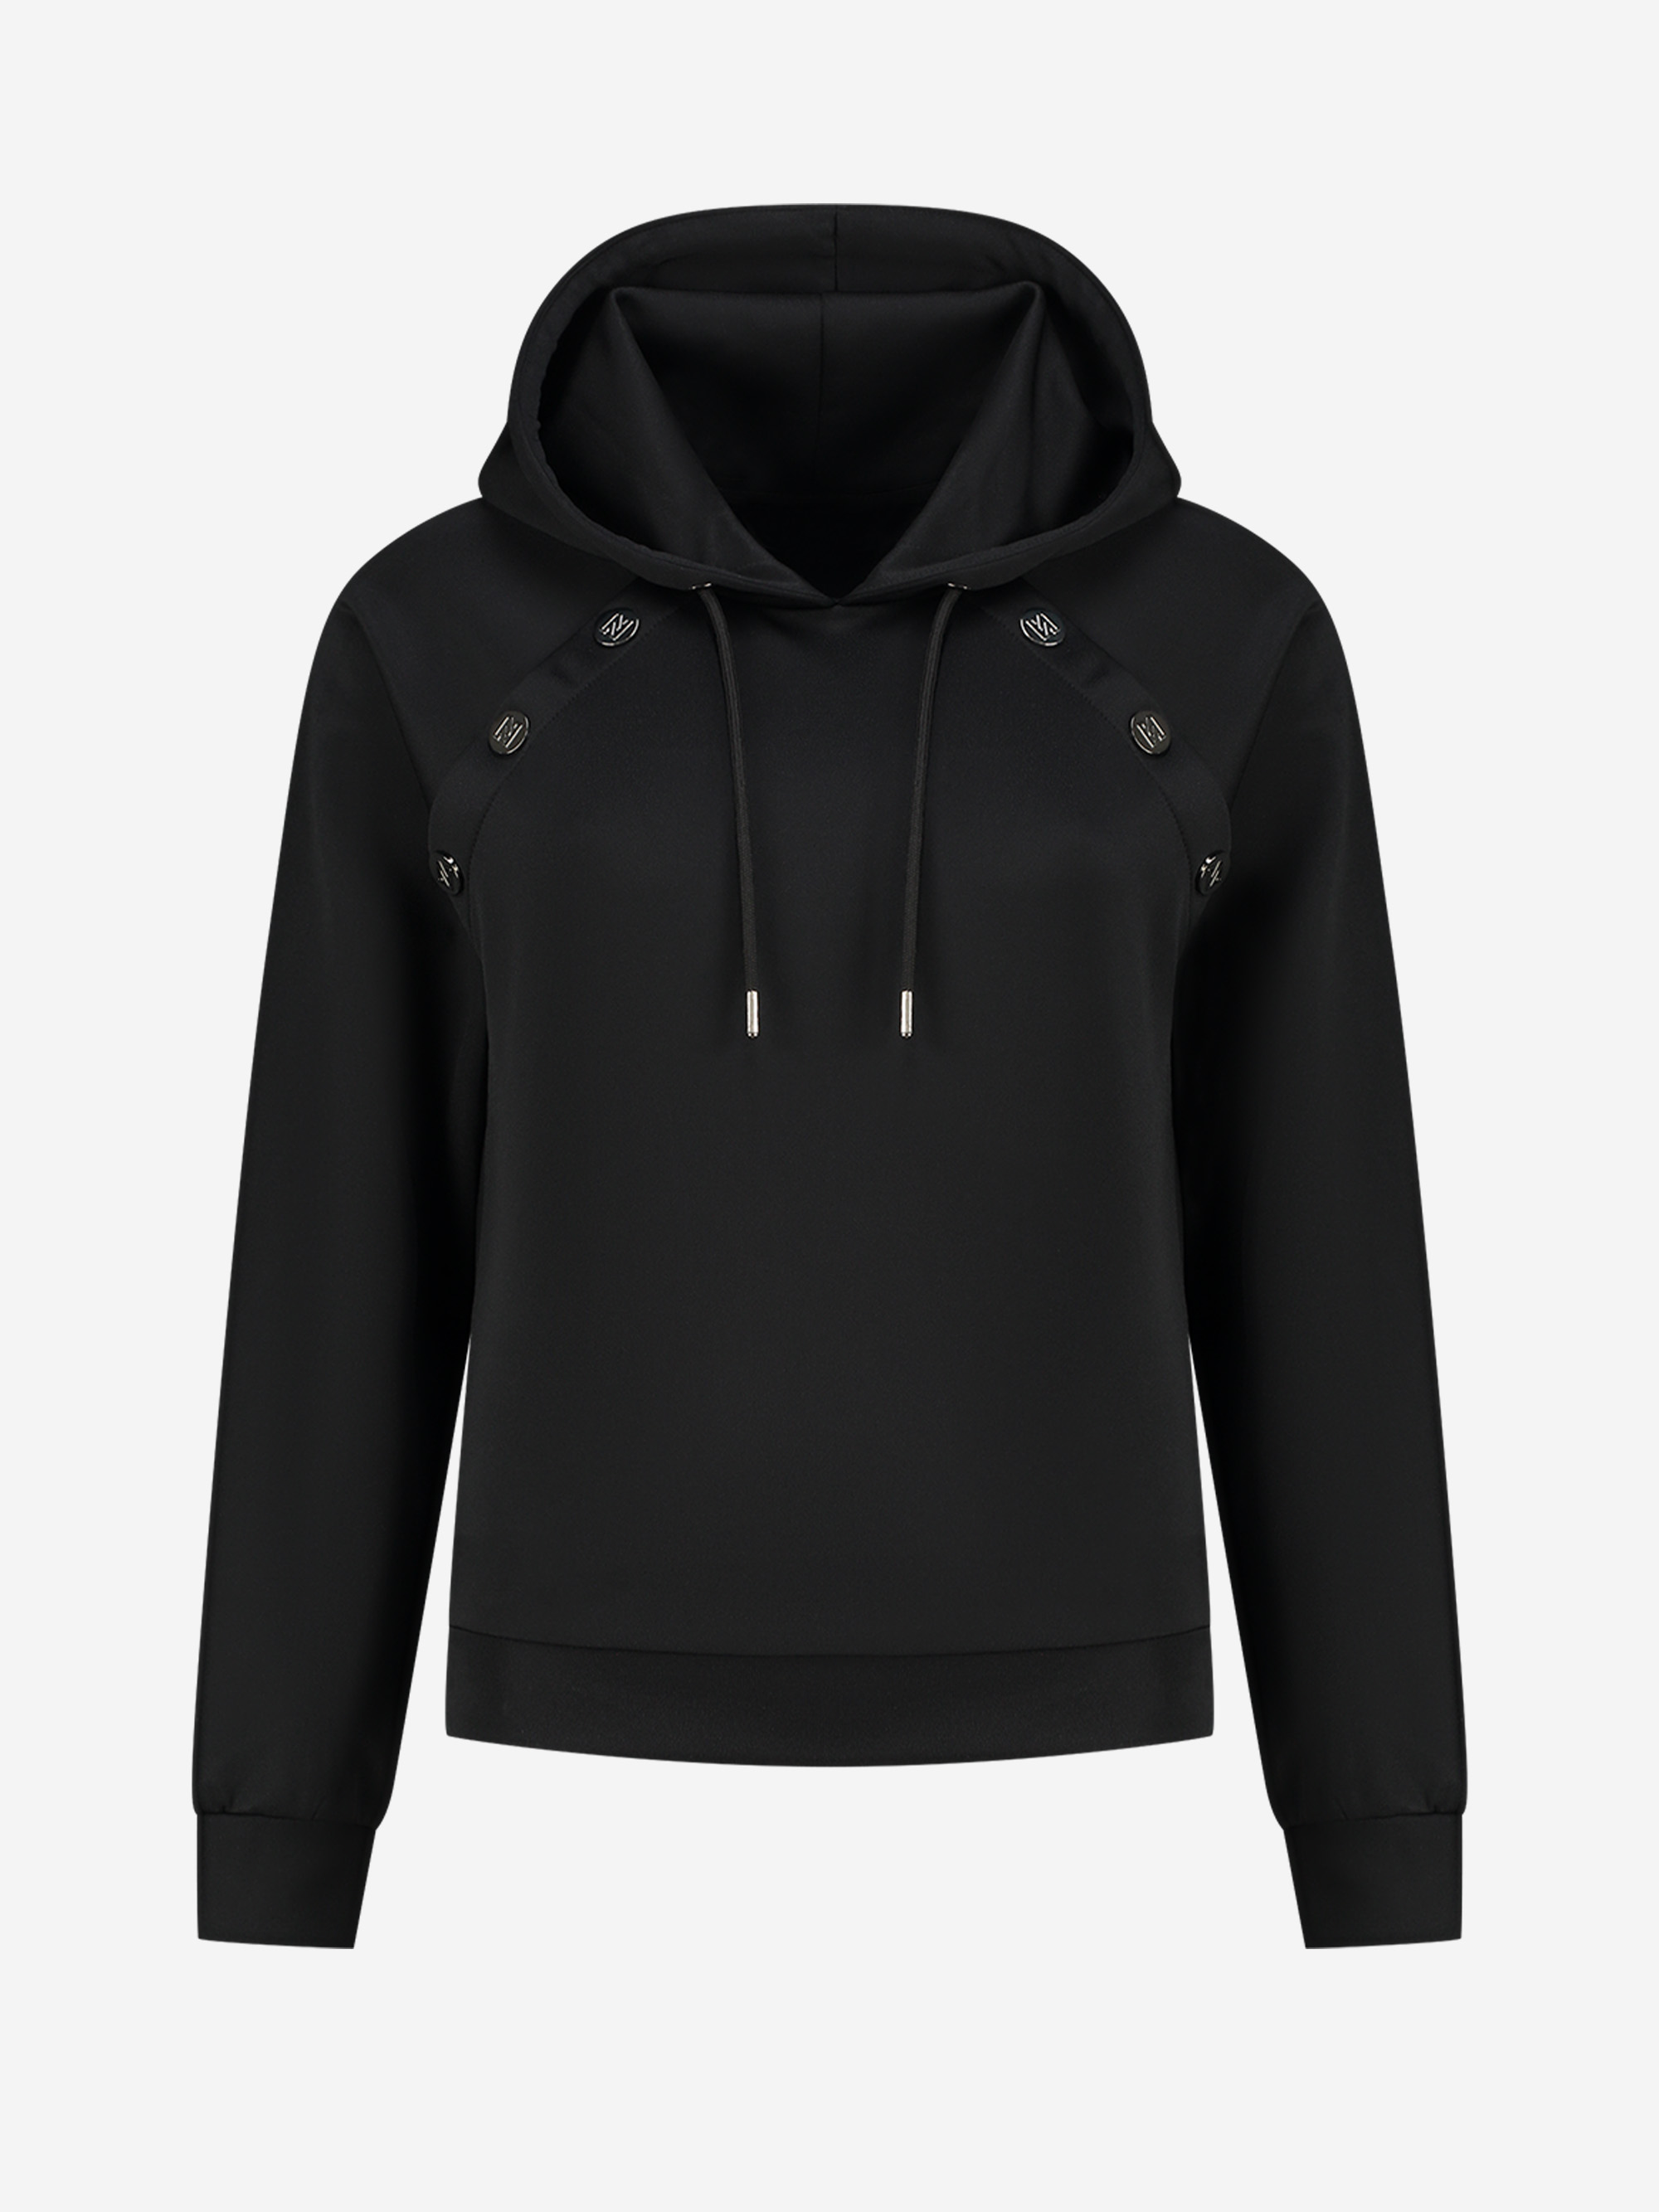 Hoodie with buttons